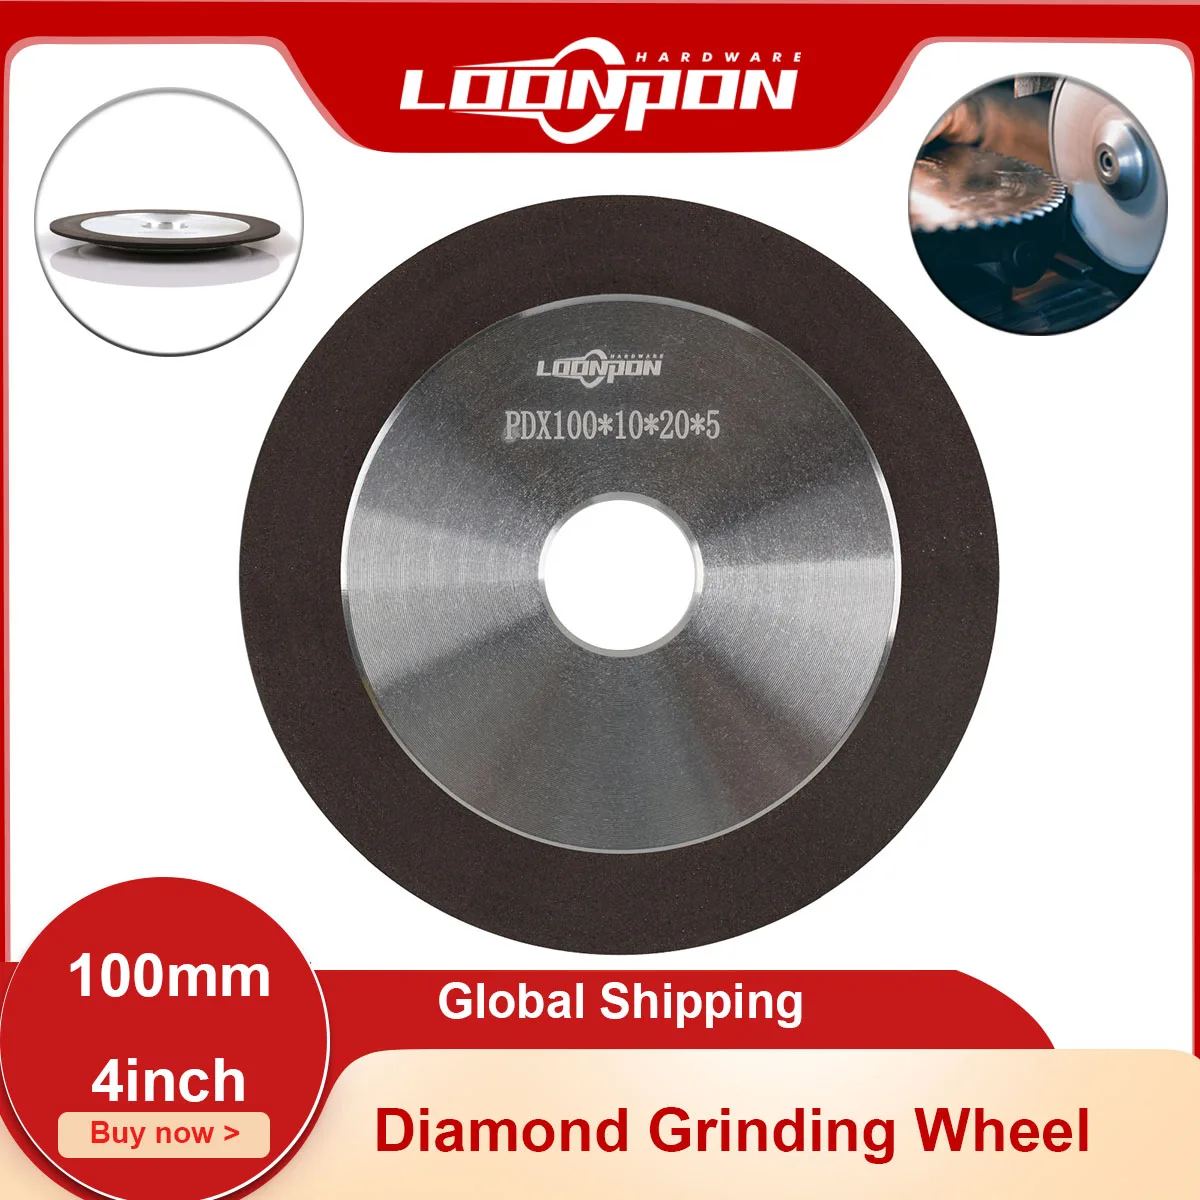 100mm/4inch Diamond Grinding Wheel Grinding Circle Grit 150 for Tungsten Steel Milling Cutter Tool Sharpener Grinder 1pcs 100 150mm diamond grinding wheel cup grinding circle for tungsten steel milling cutter tools sharpener grinder 150 400grits